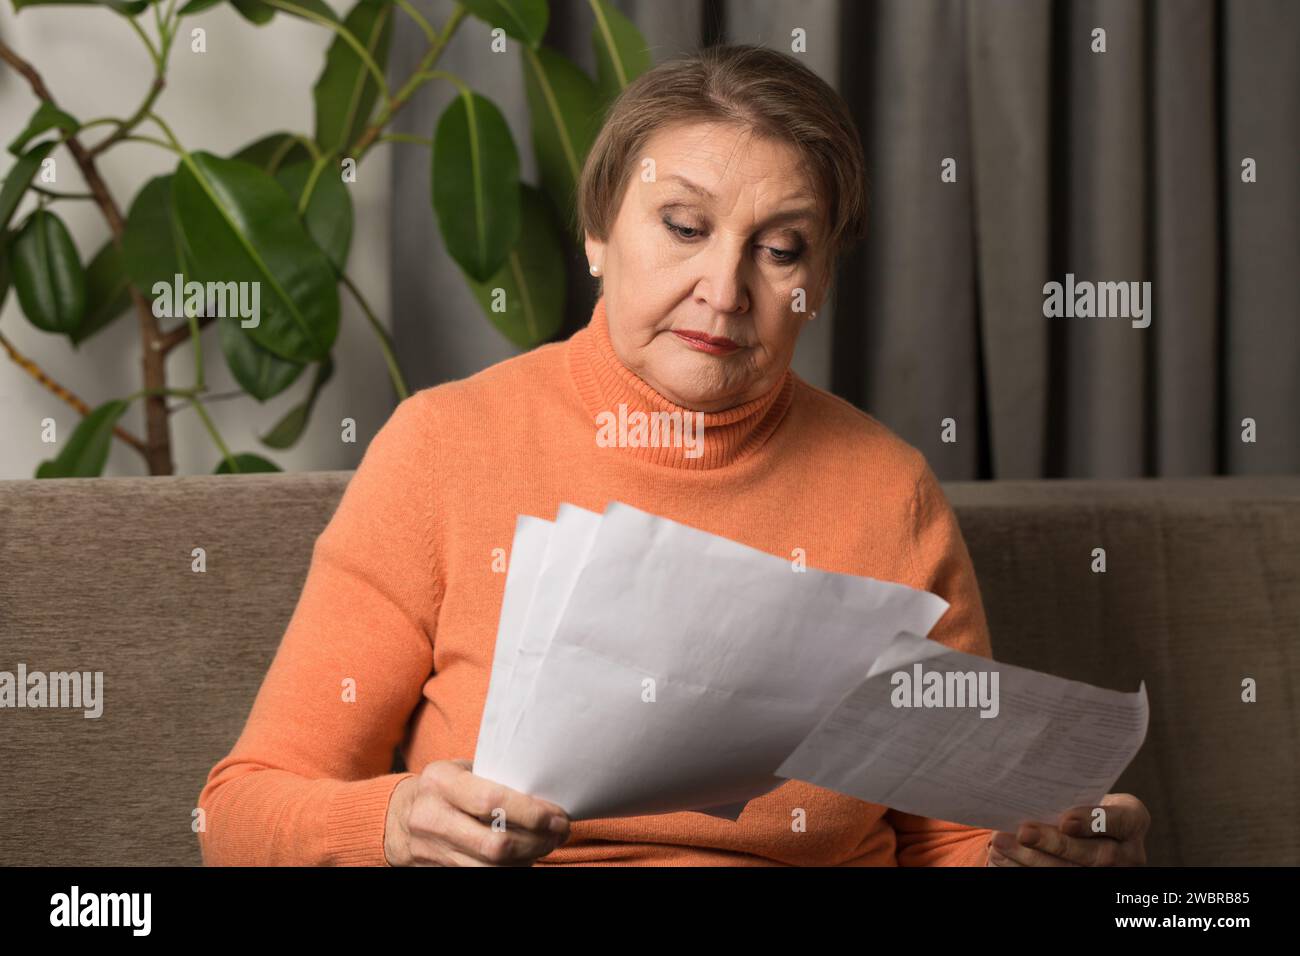 Portrait of an old woman looking at bills while sitting Stock Photo